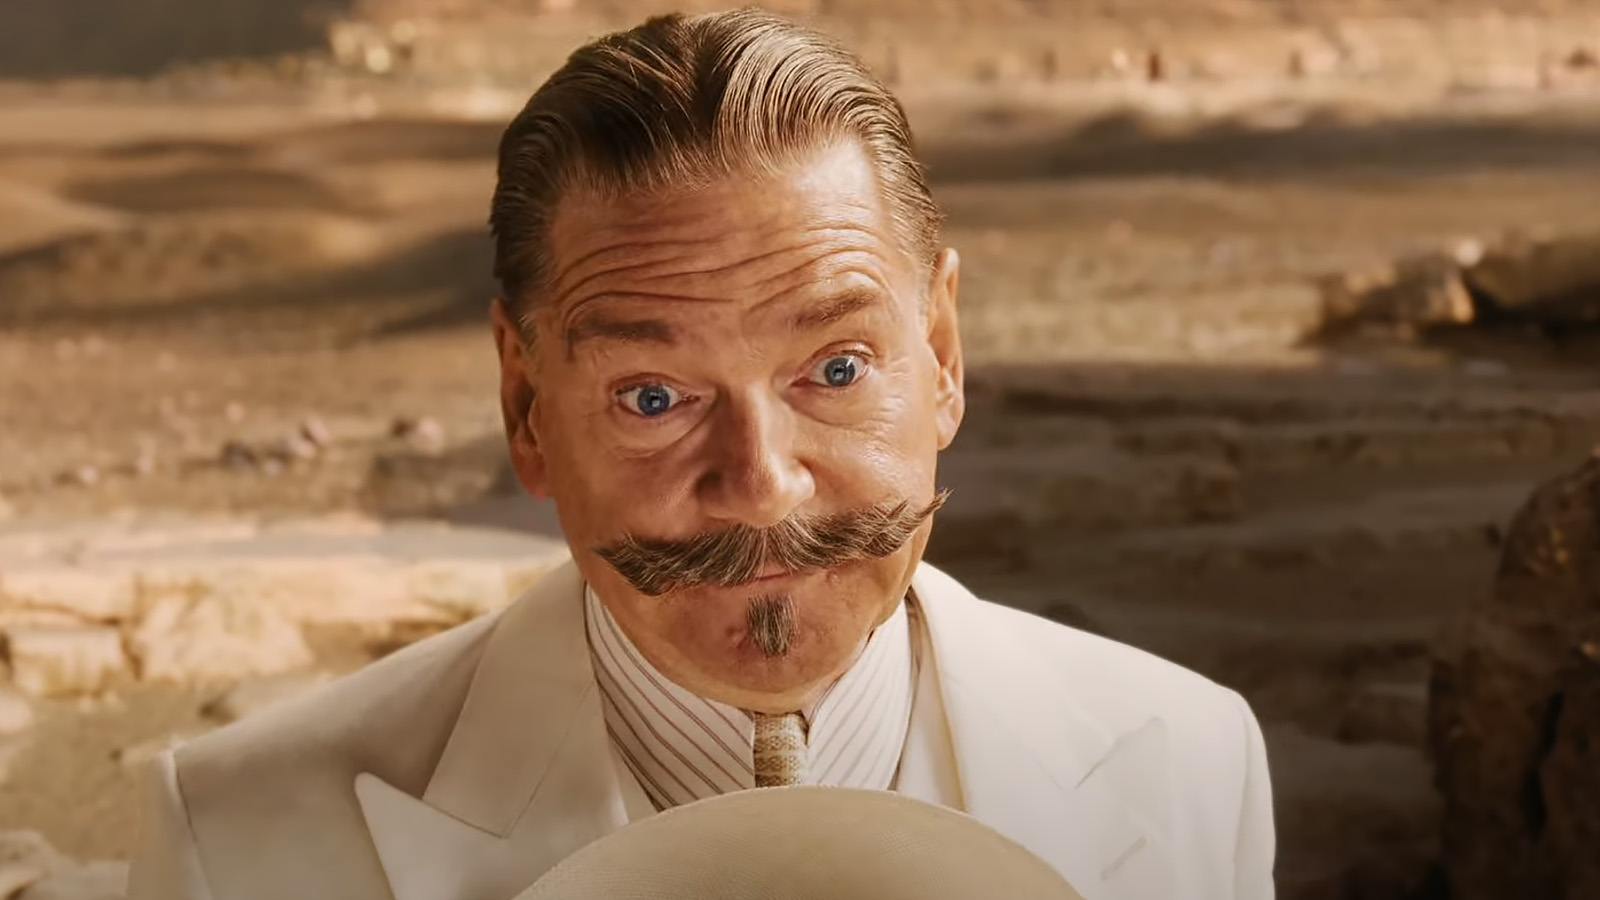 Kenneth Branagh and mustache in Death on the Nile. Image © 20th Century Studios